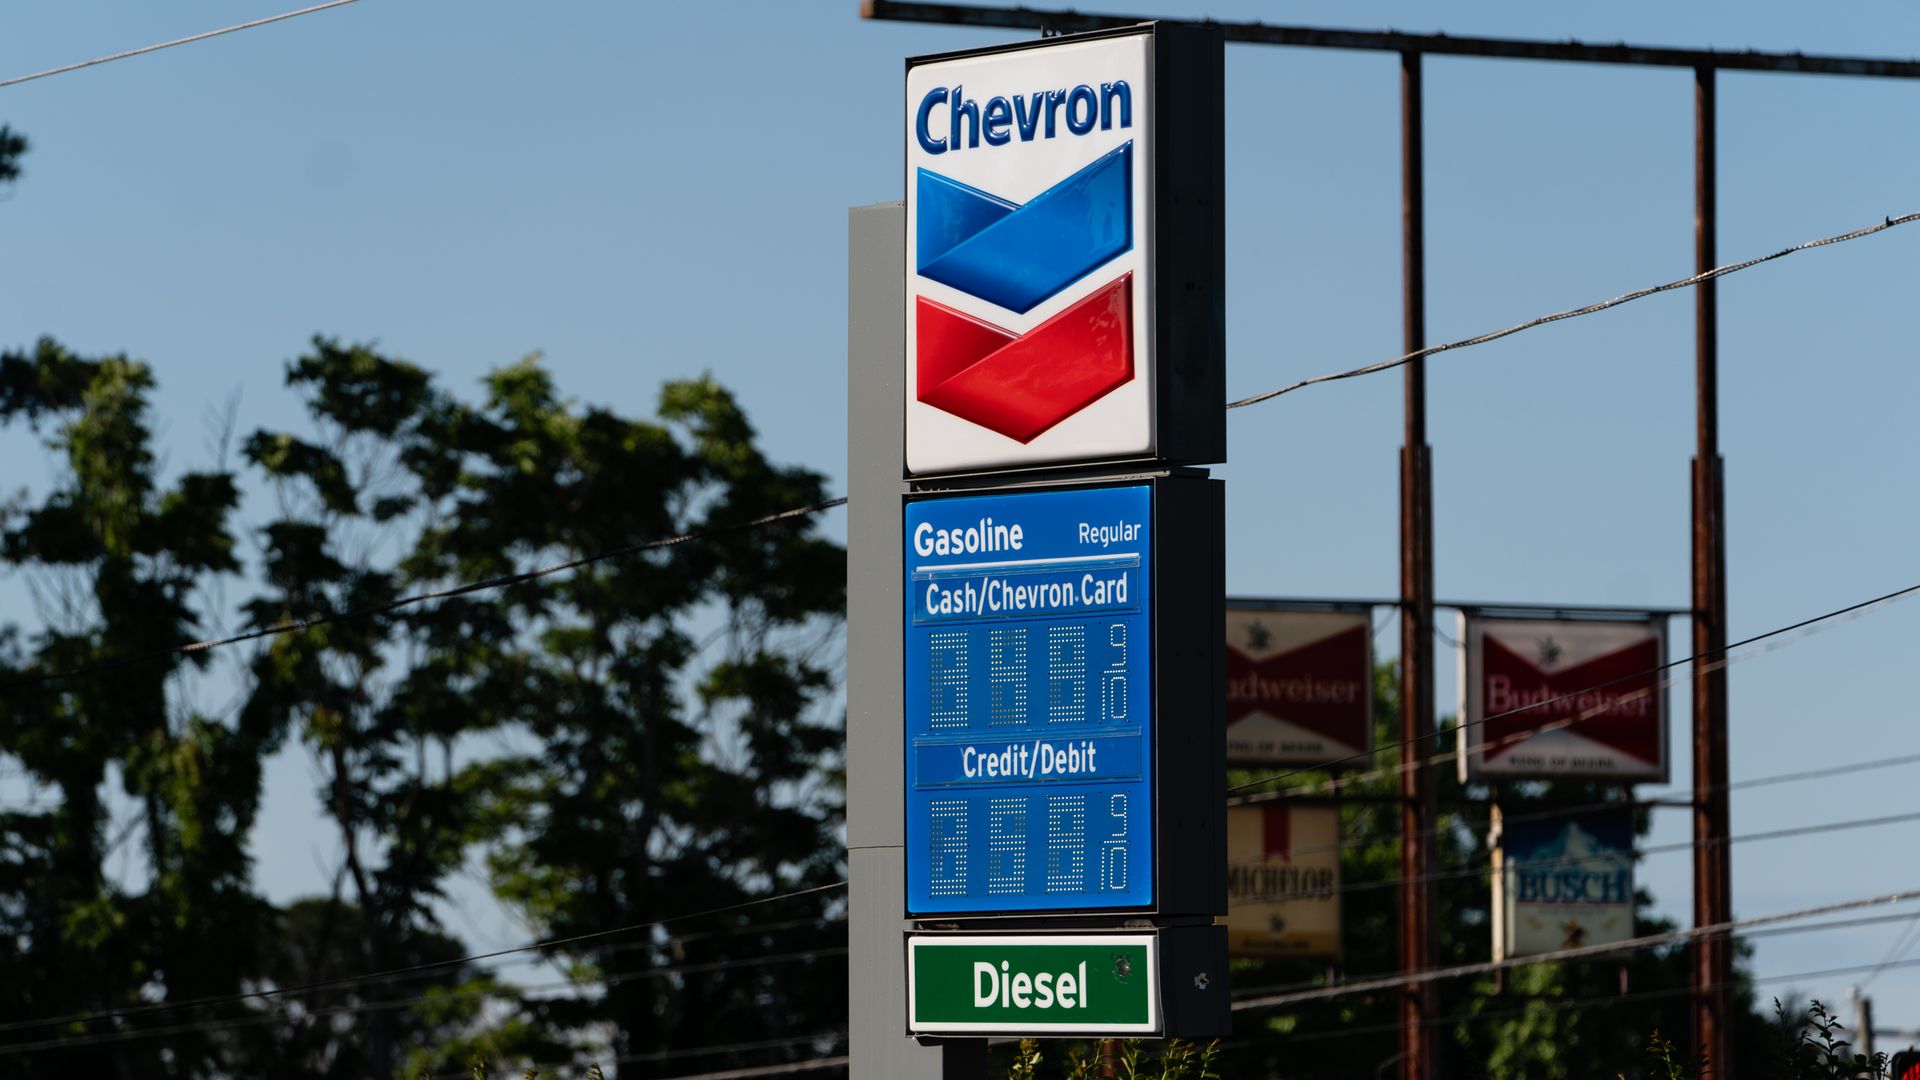 A Chevron Corp. gas station displays a price for regular gas exceeding $3.50 a gallon in Atlanta.